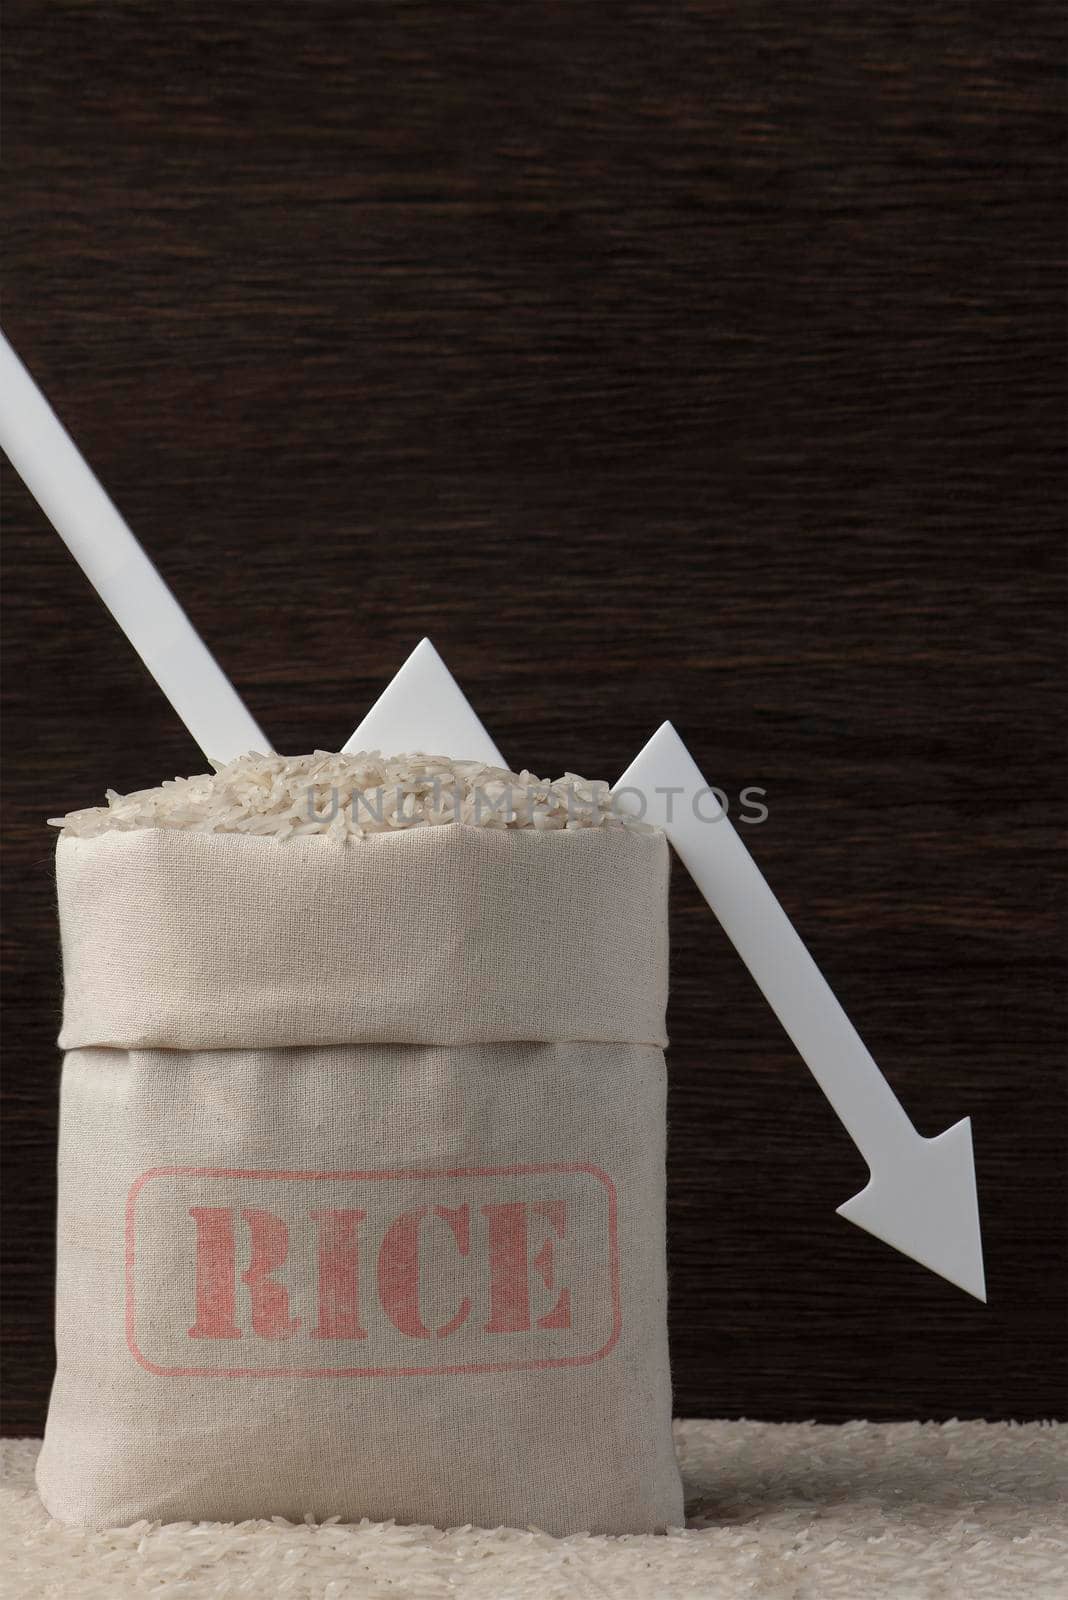 Rice harvest. Poor agricultural crops, food shortages, world hunger. A bag of rice on a brown background with a white arrow pointing down. by SERSOL